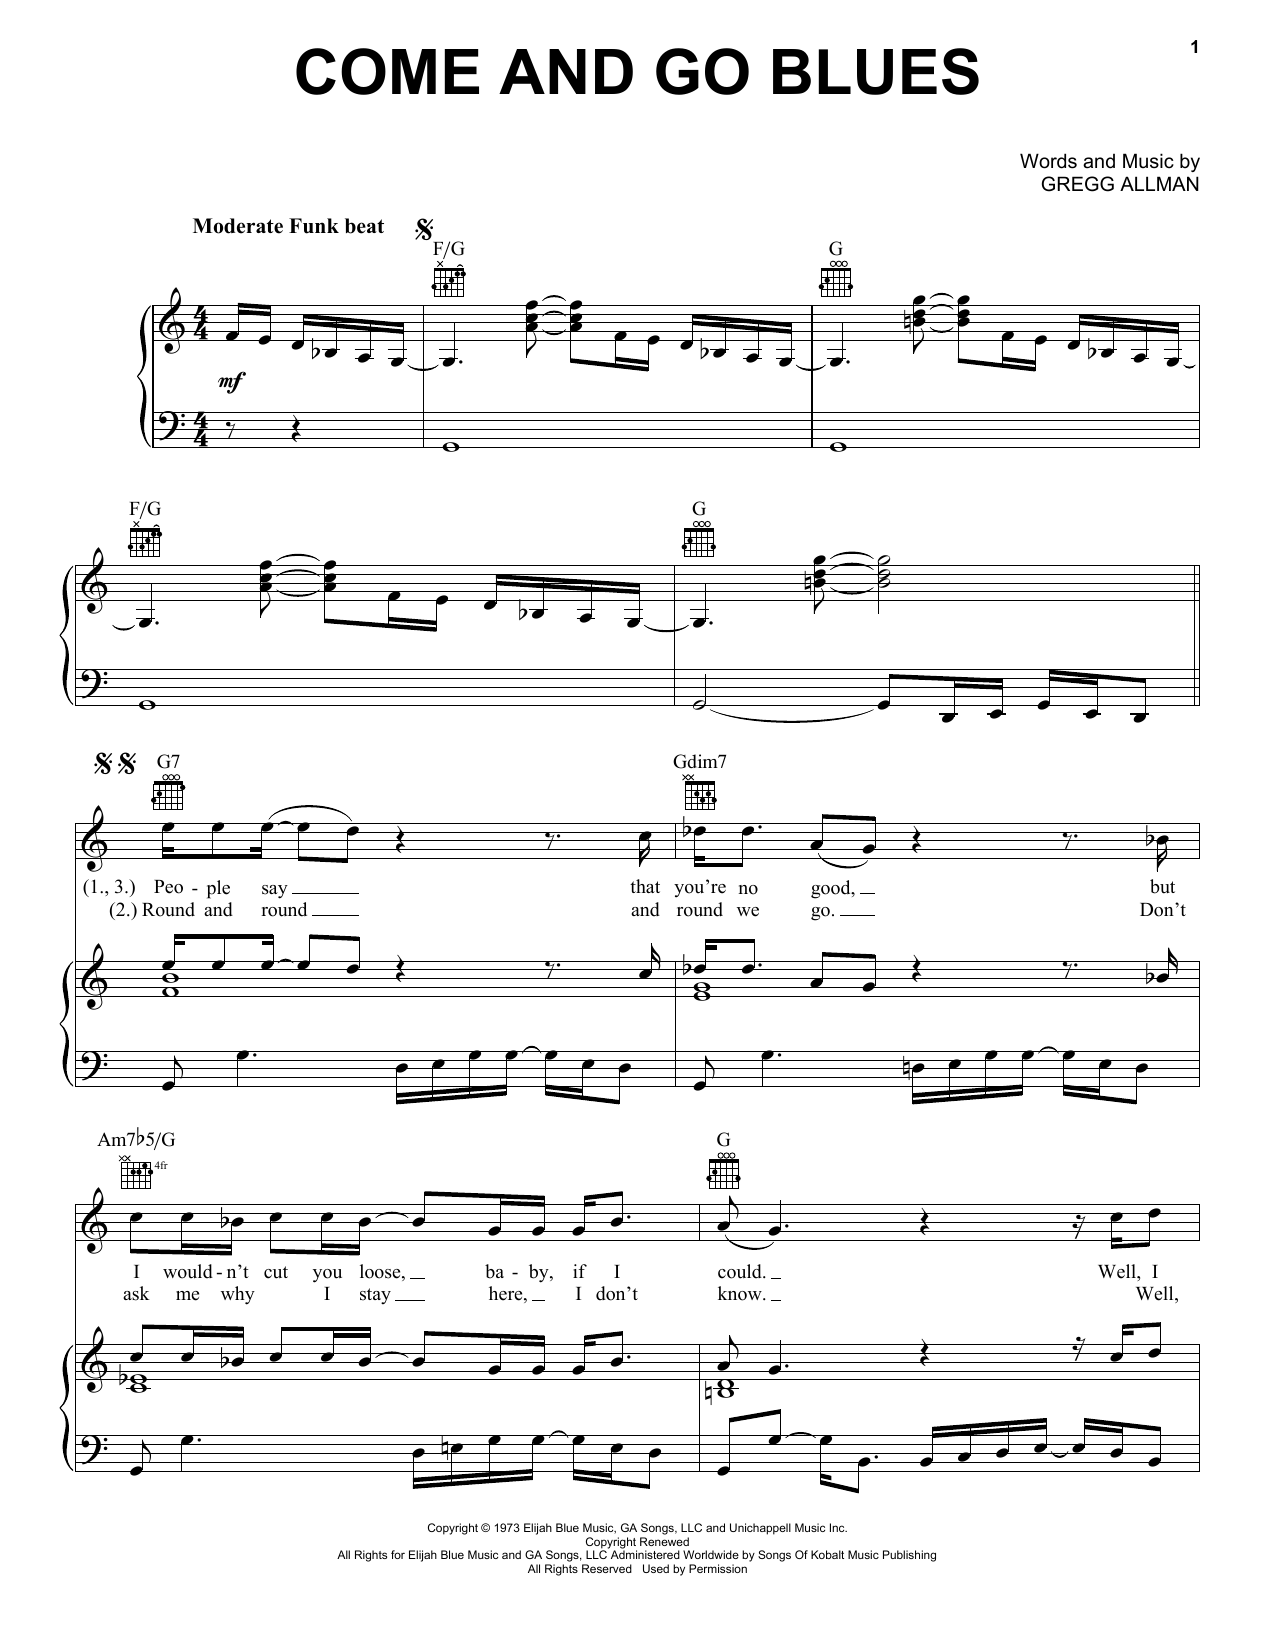 Download The Allman Brothers Band Come And Go Blues Sheet Music